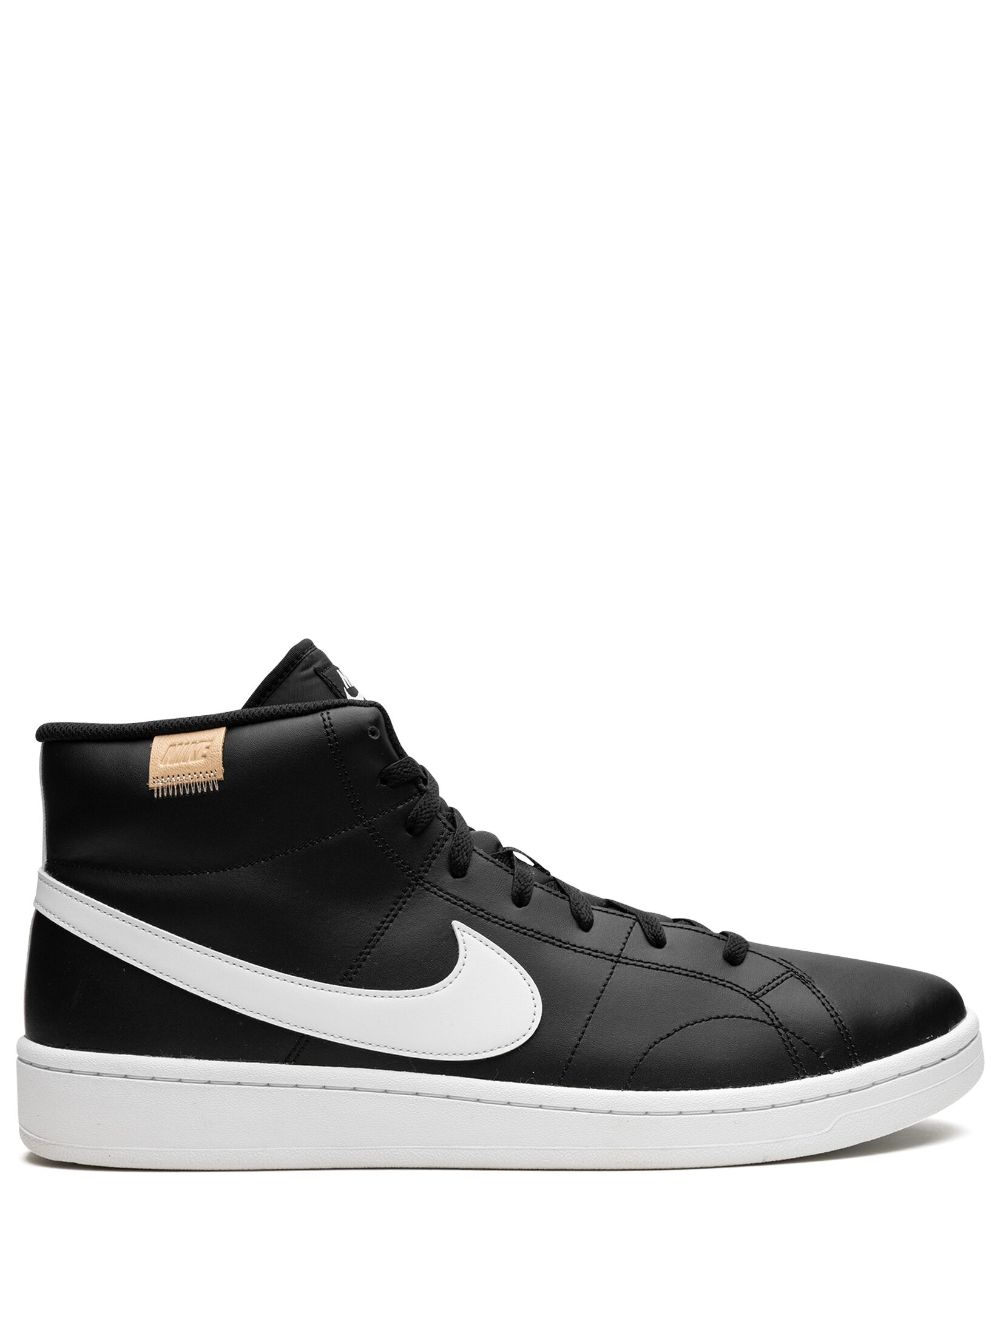 Nike Court Royale 2 Mid Trainers In Black And White